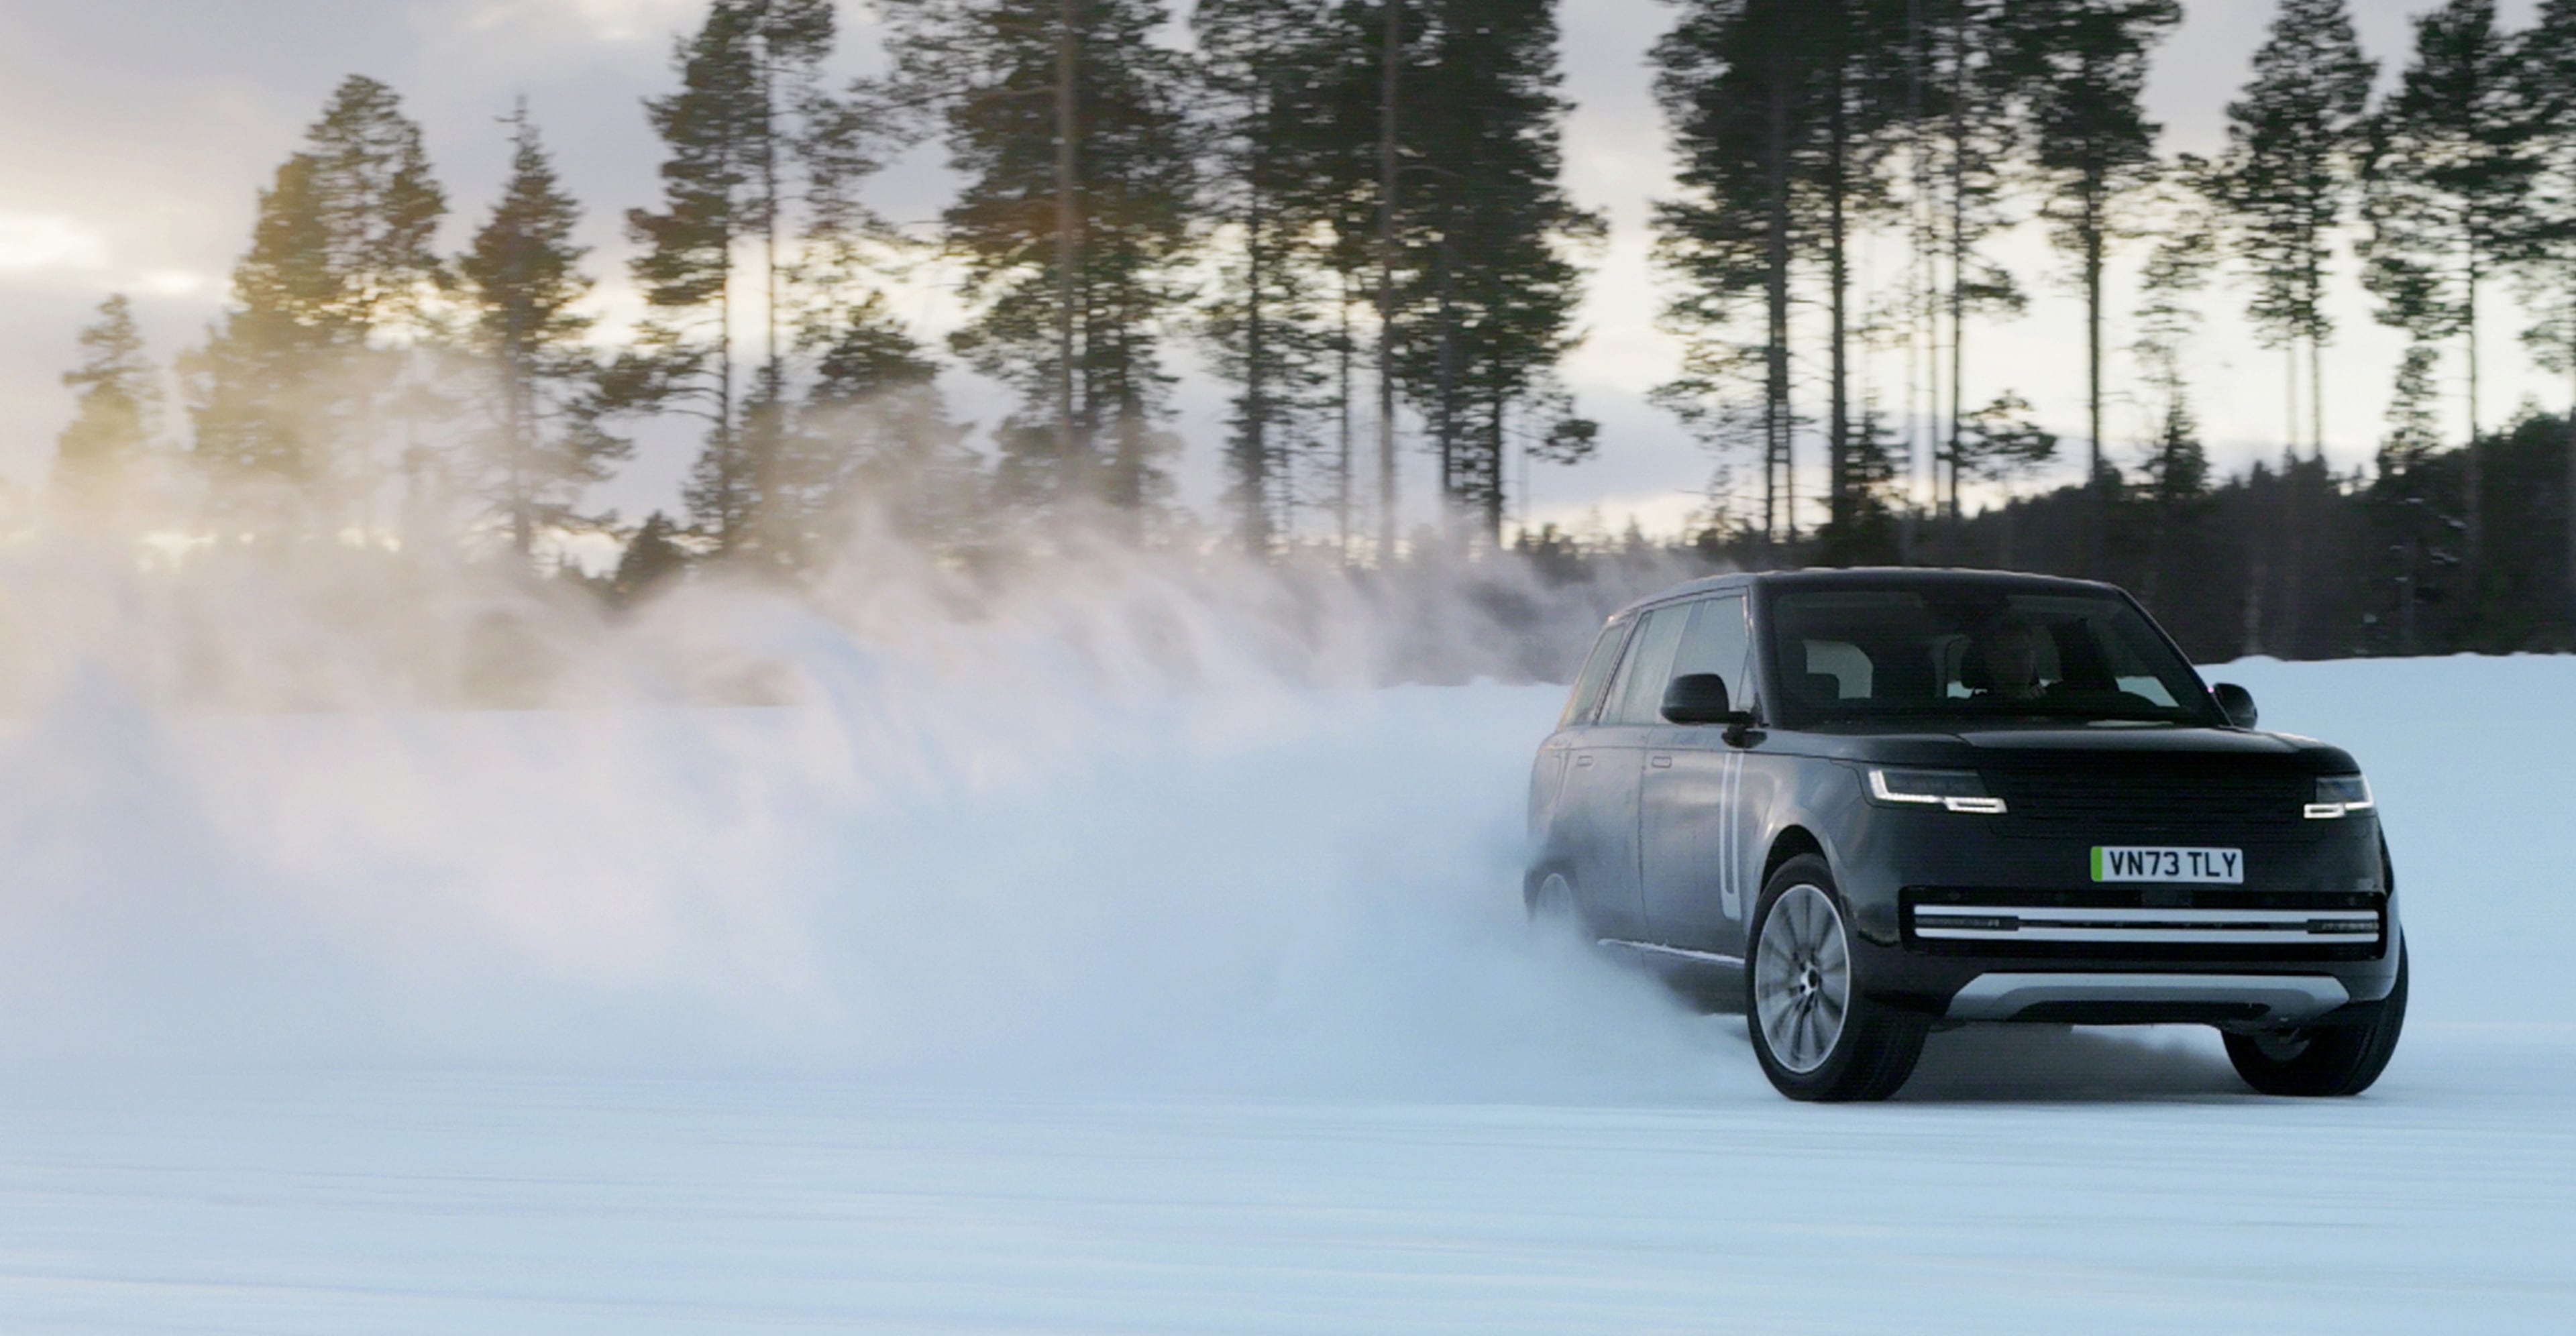 The Range Rover Electric garnered over 16,000 expressions of interest in February since order books opened in December last year. The number now stands at 28,700